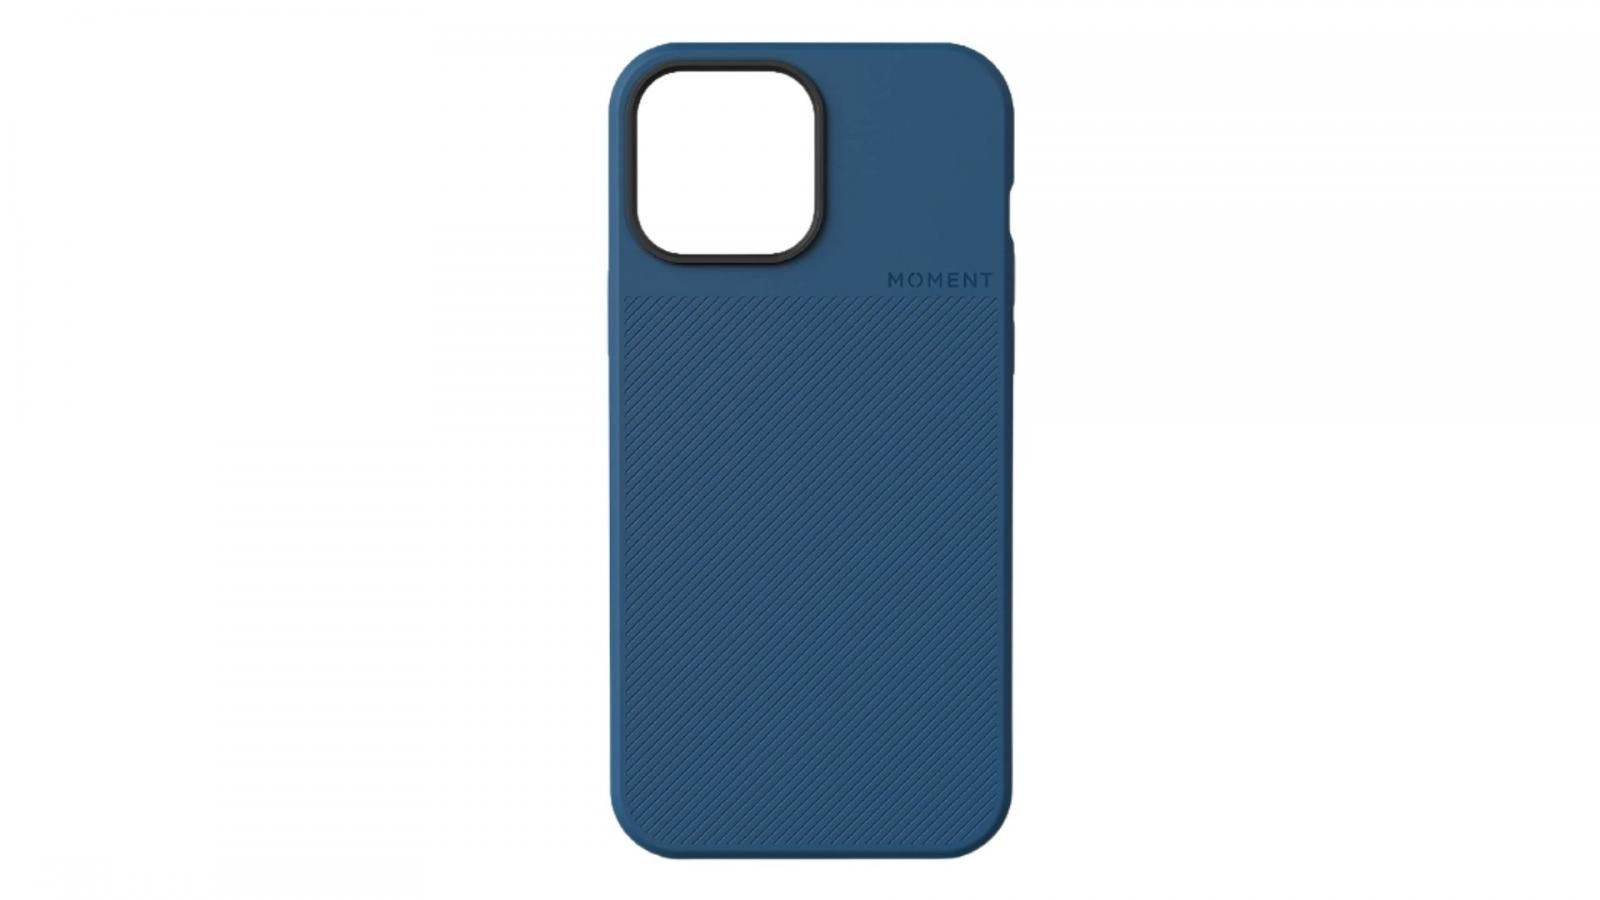 Moment Case for iPhone 13 Pro Max